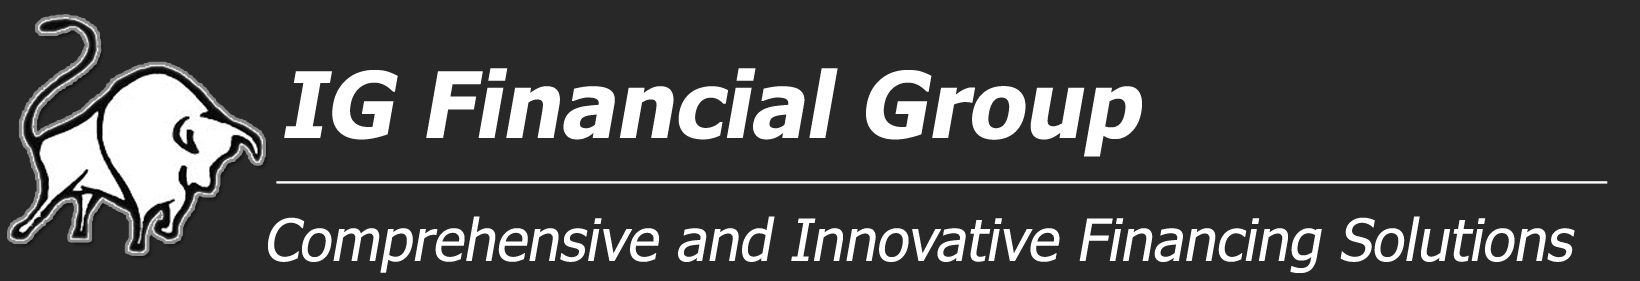 IG Financial Group